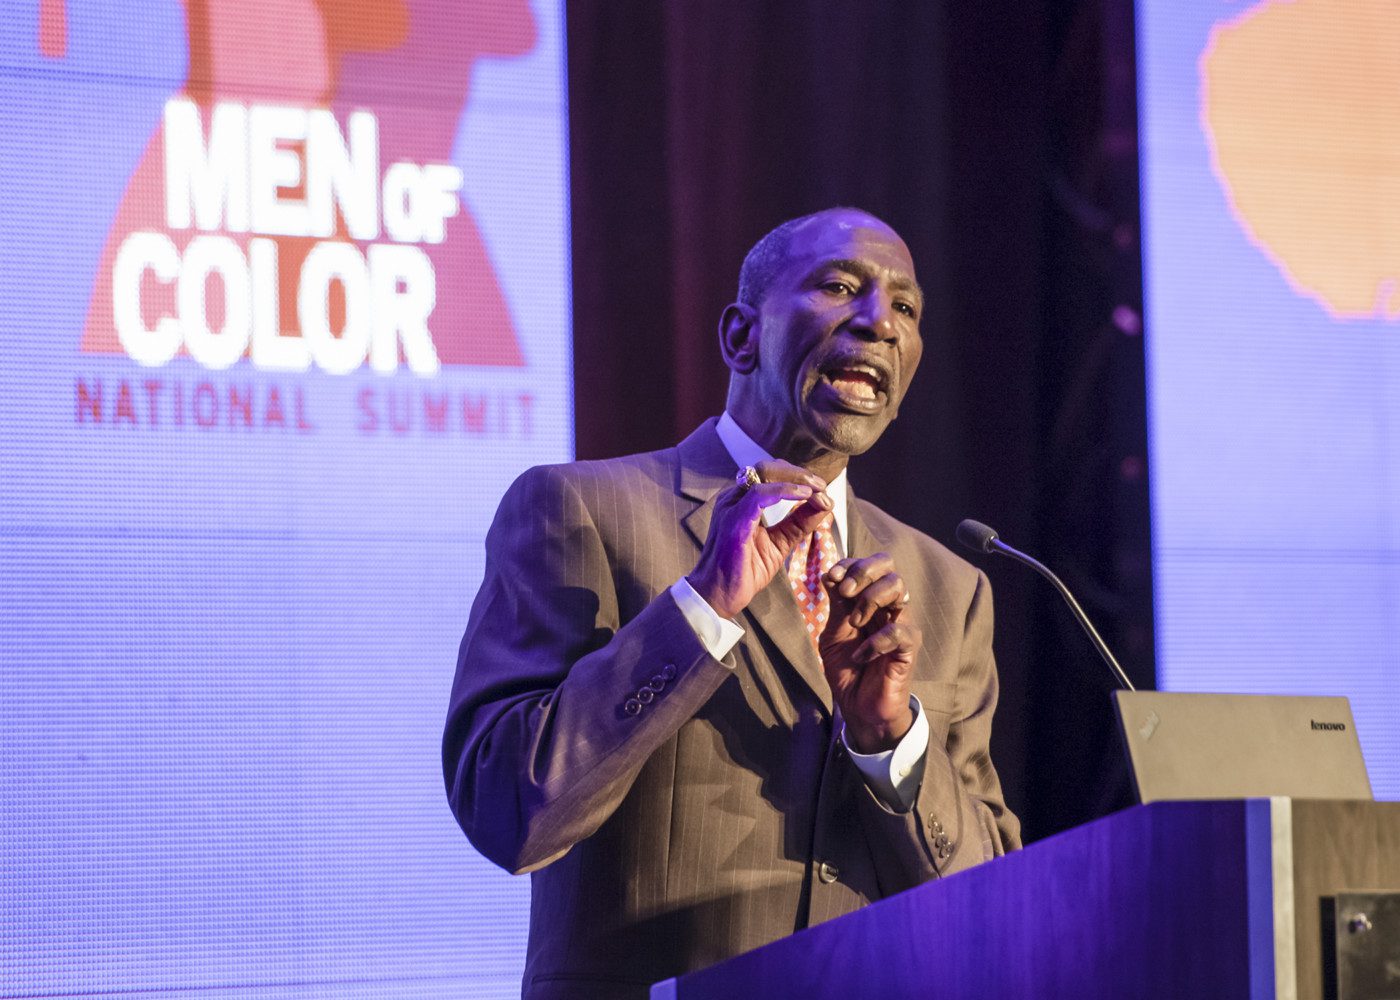 A dapper gentleman in nice suit gestures and speaks in front of a screen that says "Men of Color National Summit"